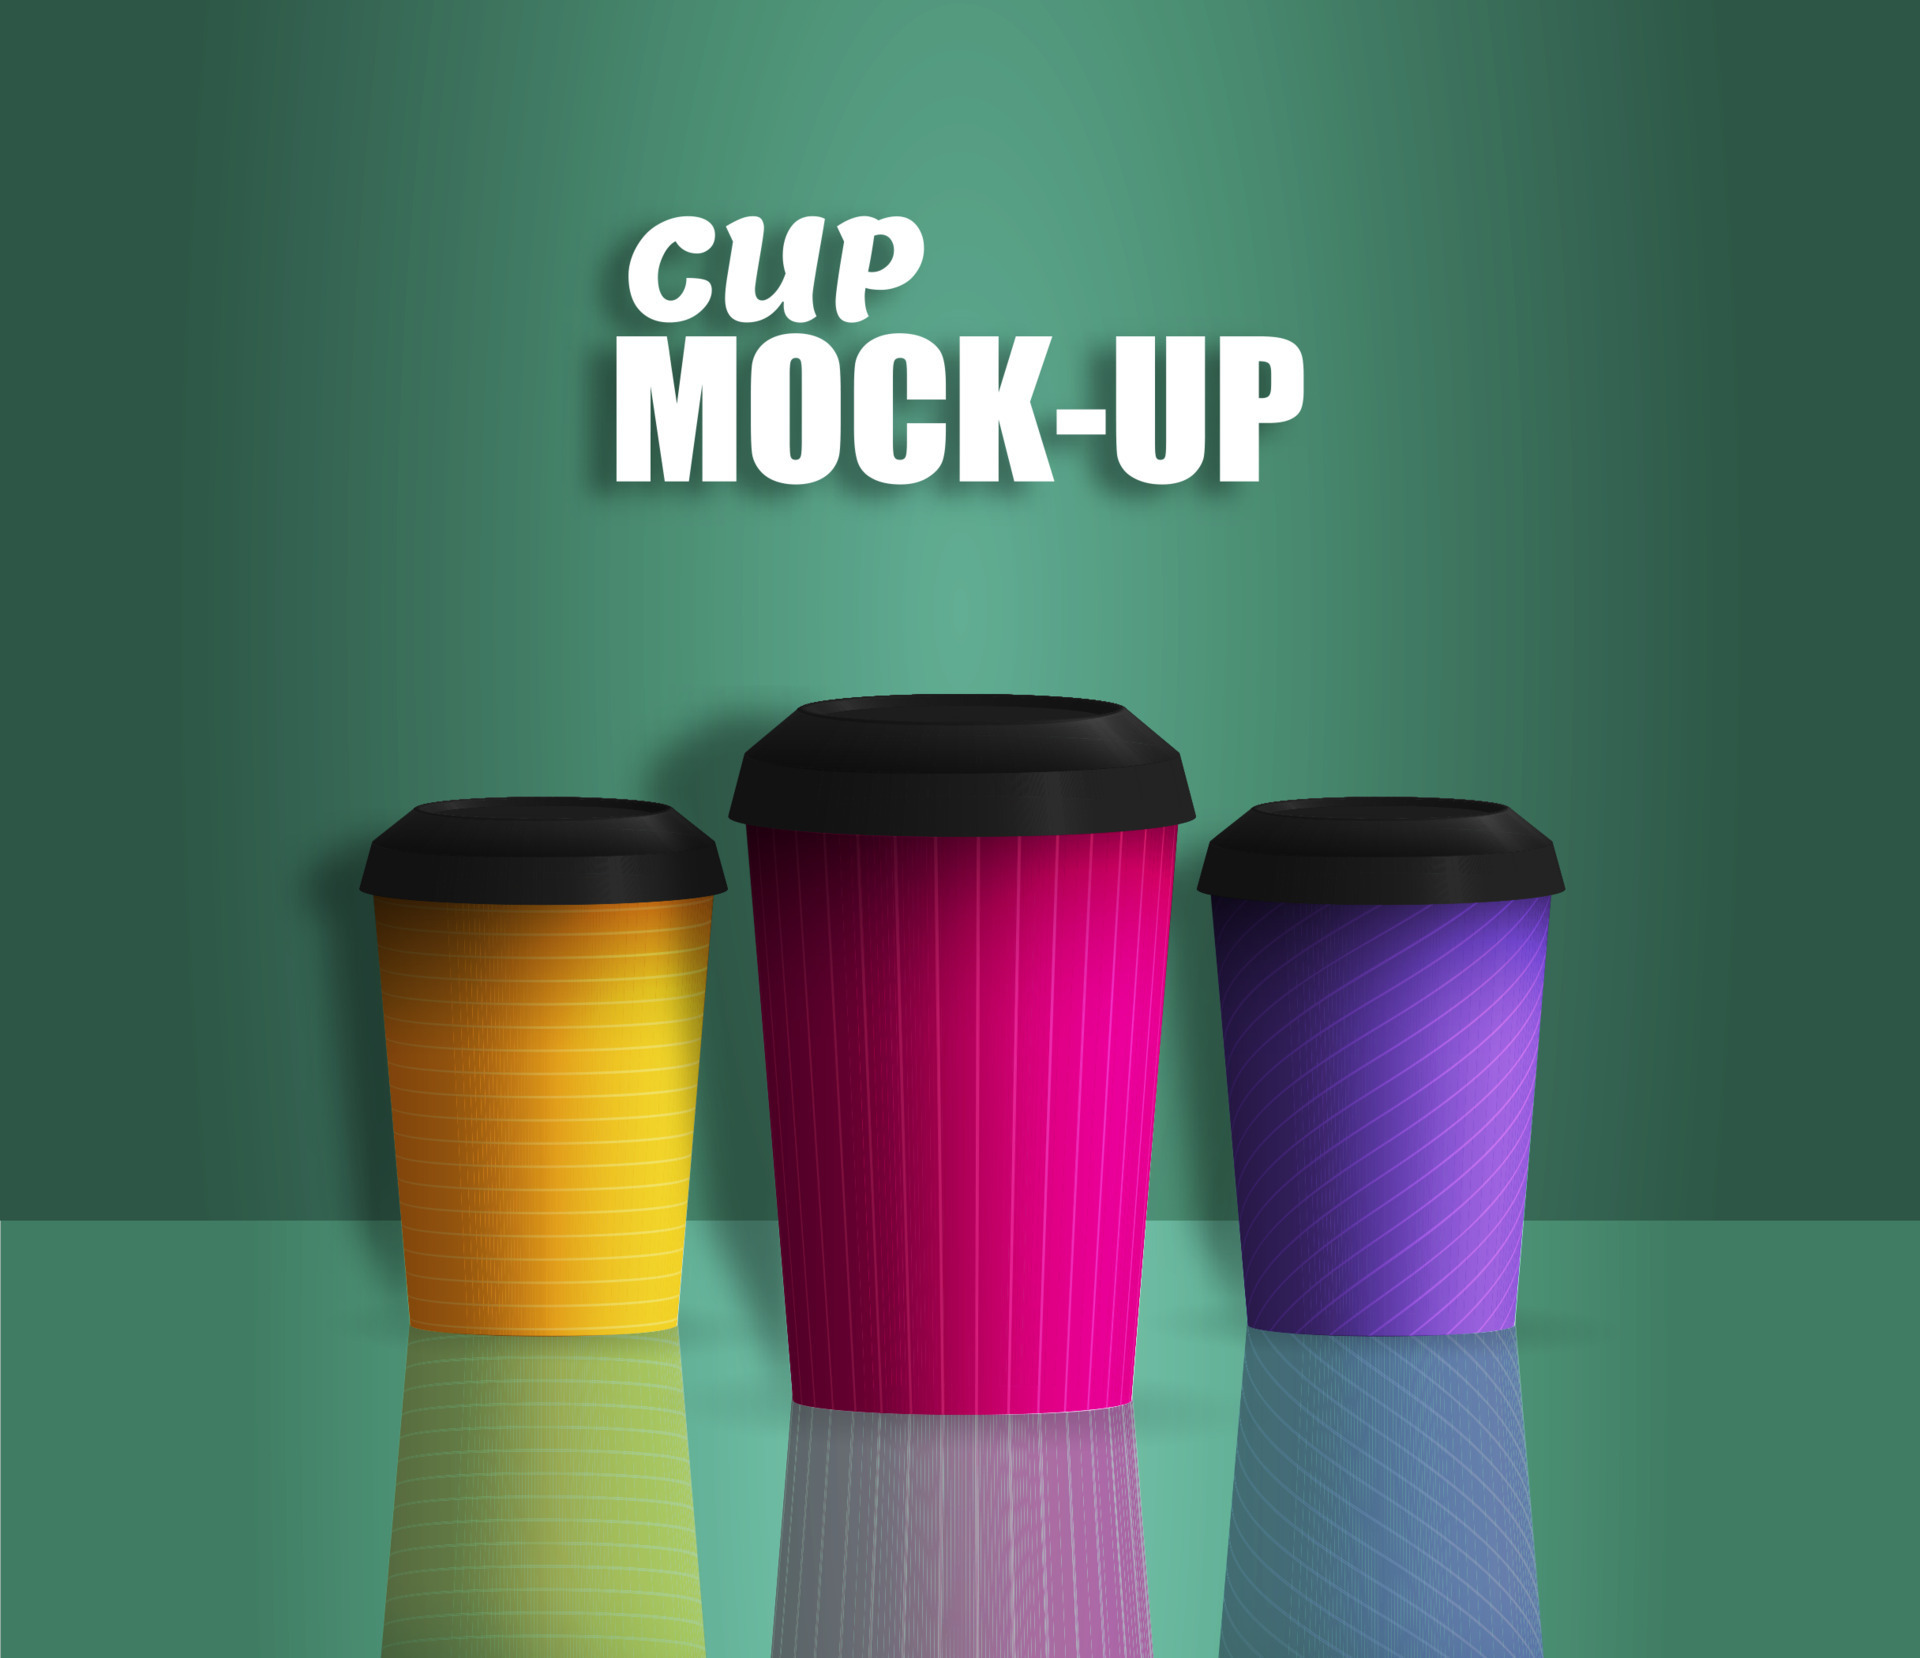 https://static.vecteezy.com/system/resources/previews/017/225/561/original/closed-paper-cup-set-collection-of-plastic-cups-with-covers-front-view-mockup-design-templates-3d-realistic-illustration-vector.jpg